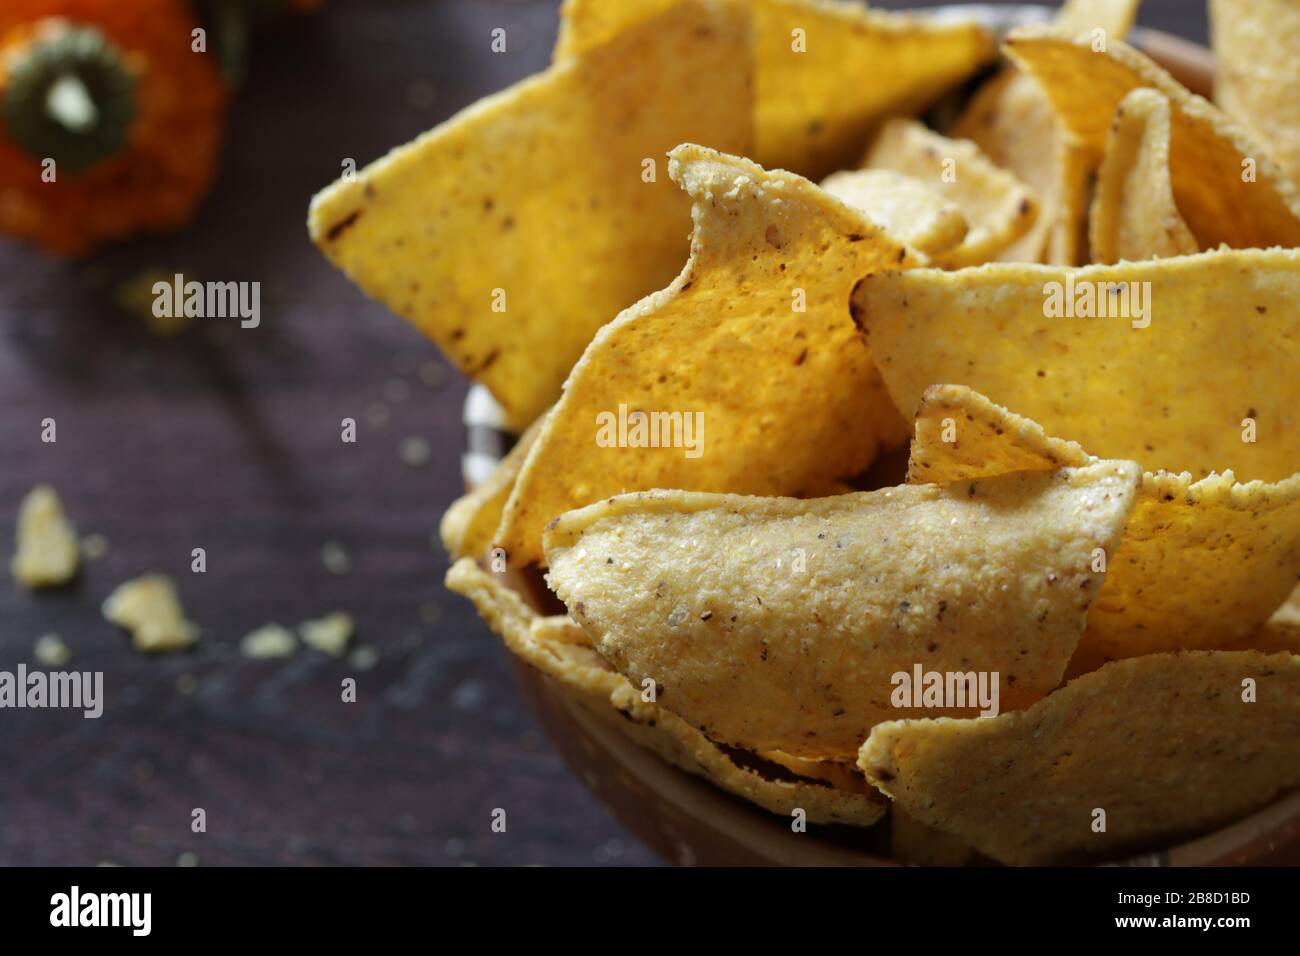 Concept of mexican cuisine. Tortilla chips in a bowl with tomato salsa. Top view. Stock Photo